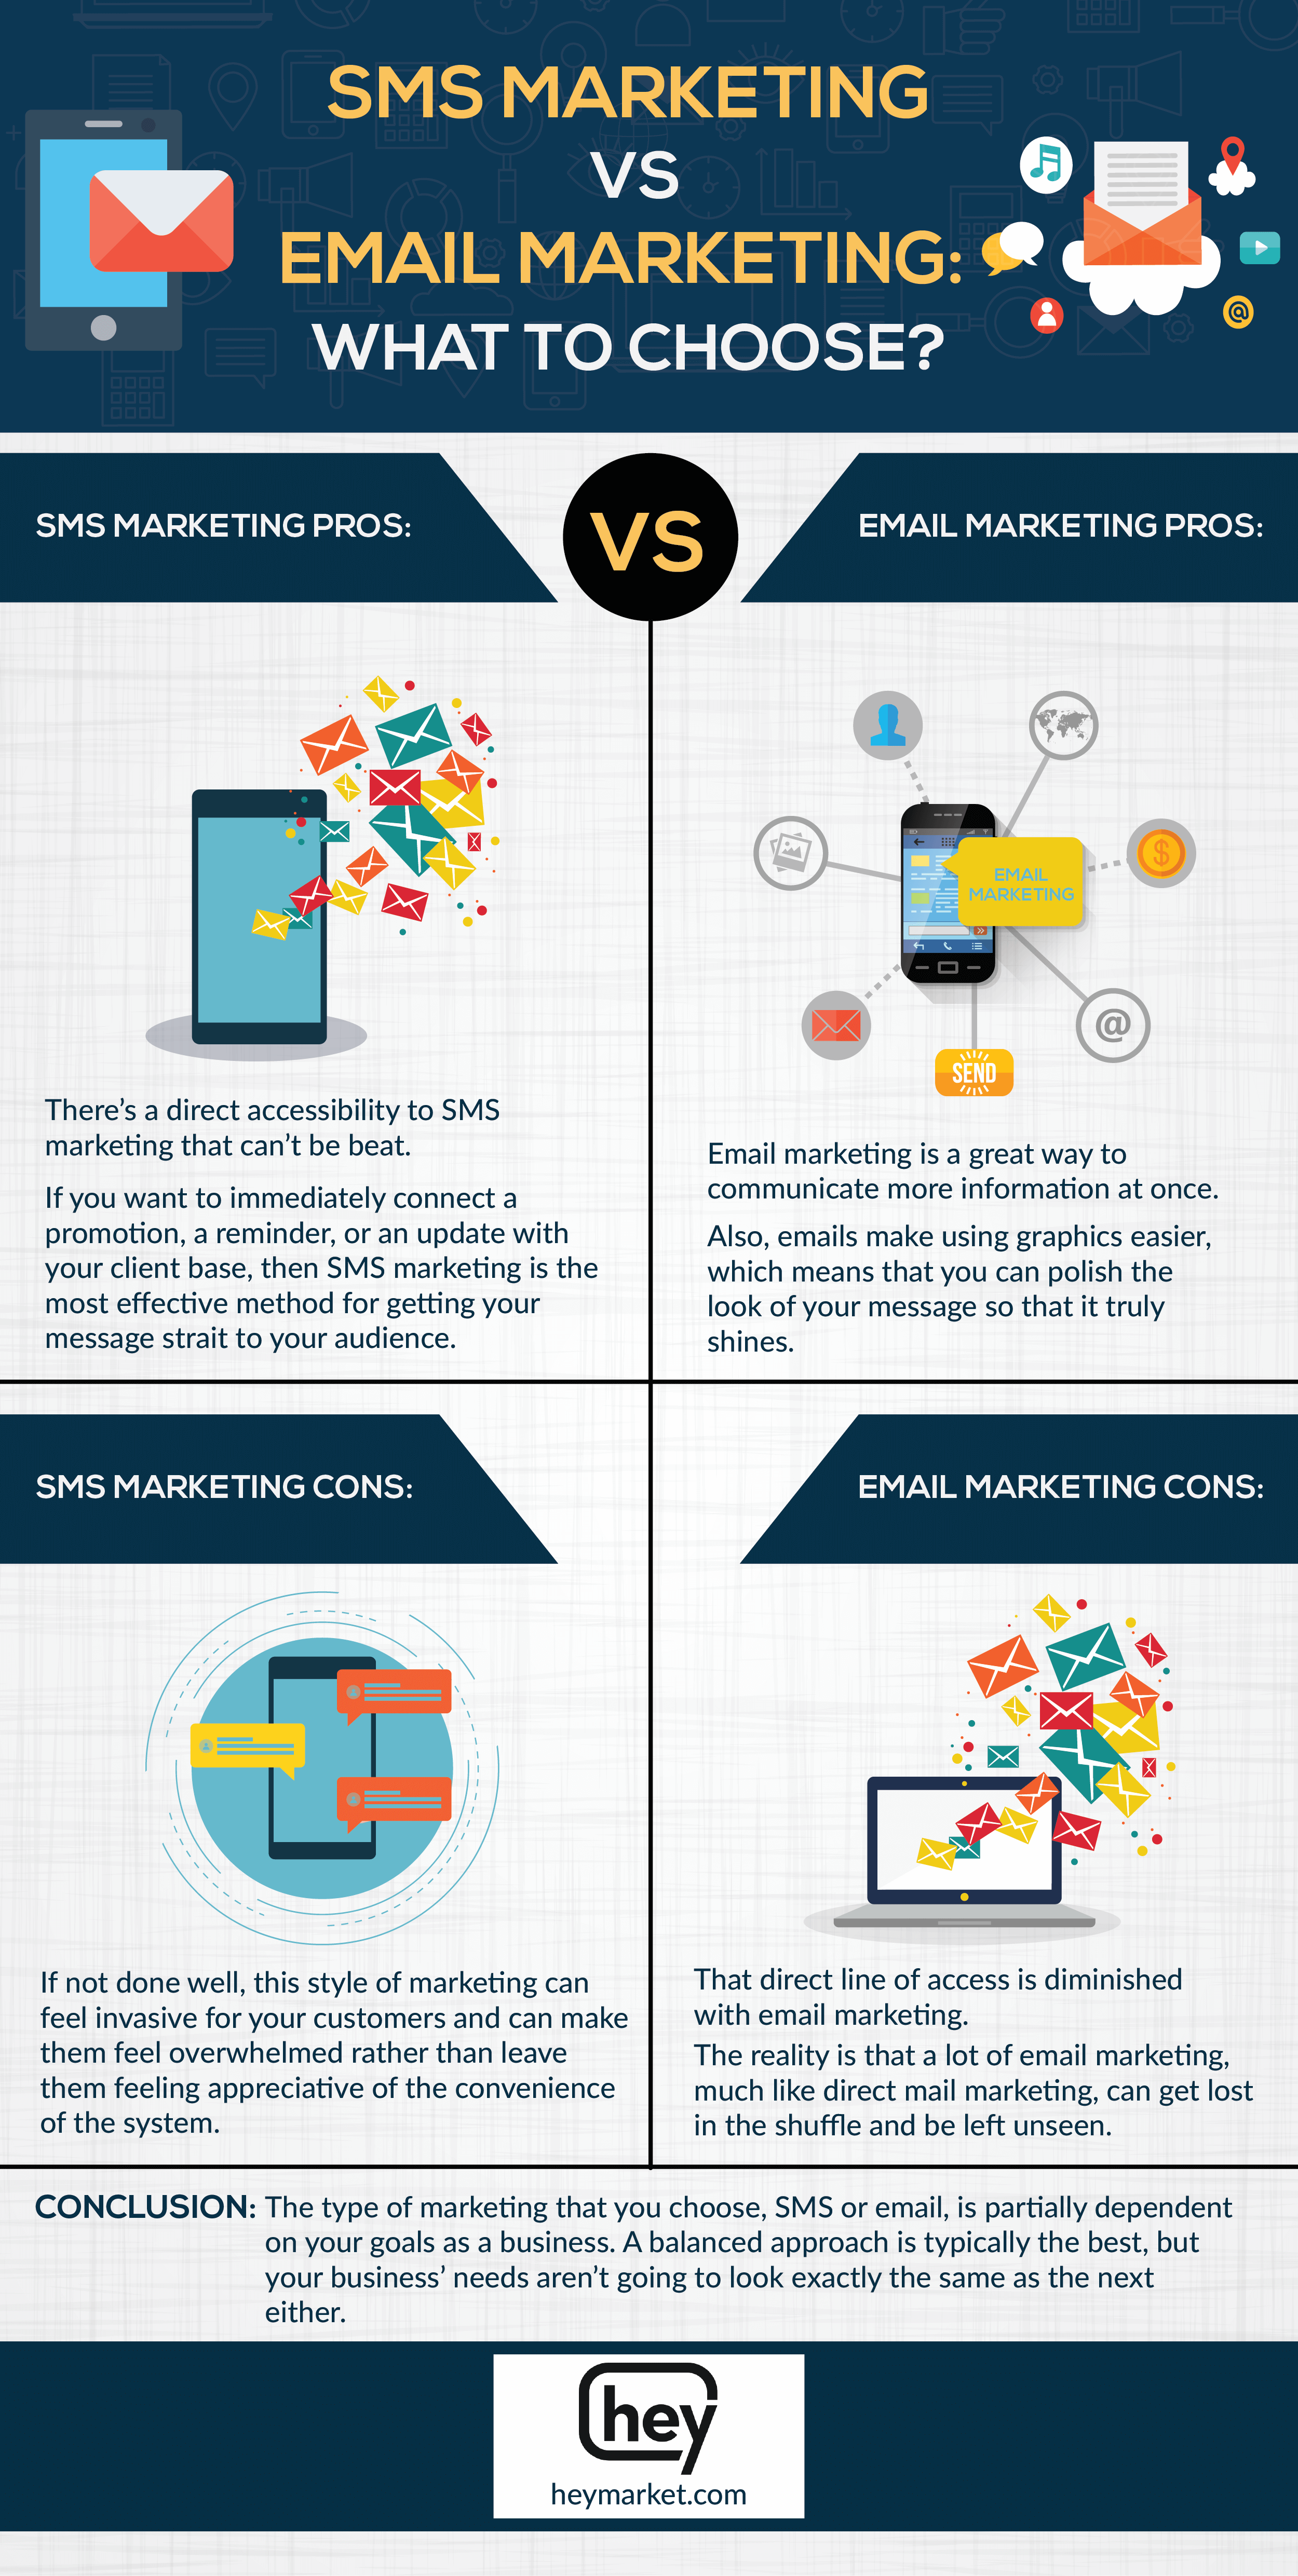 Infographic comparing SMS marketing pros and cons with email marketing pros and cons